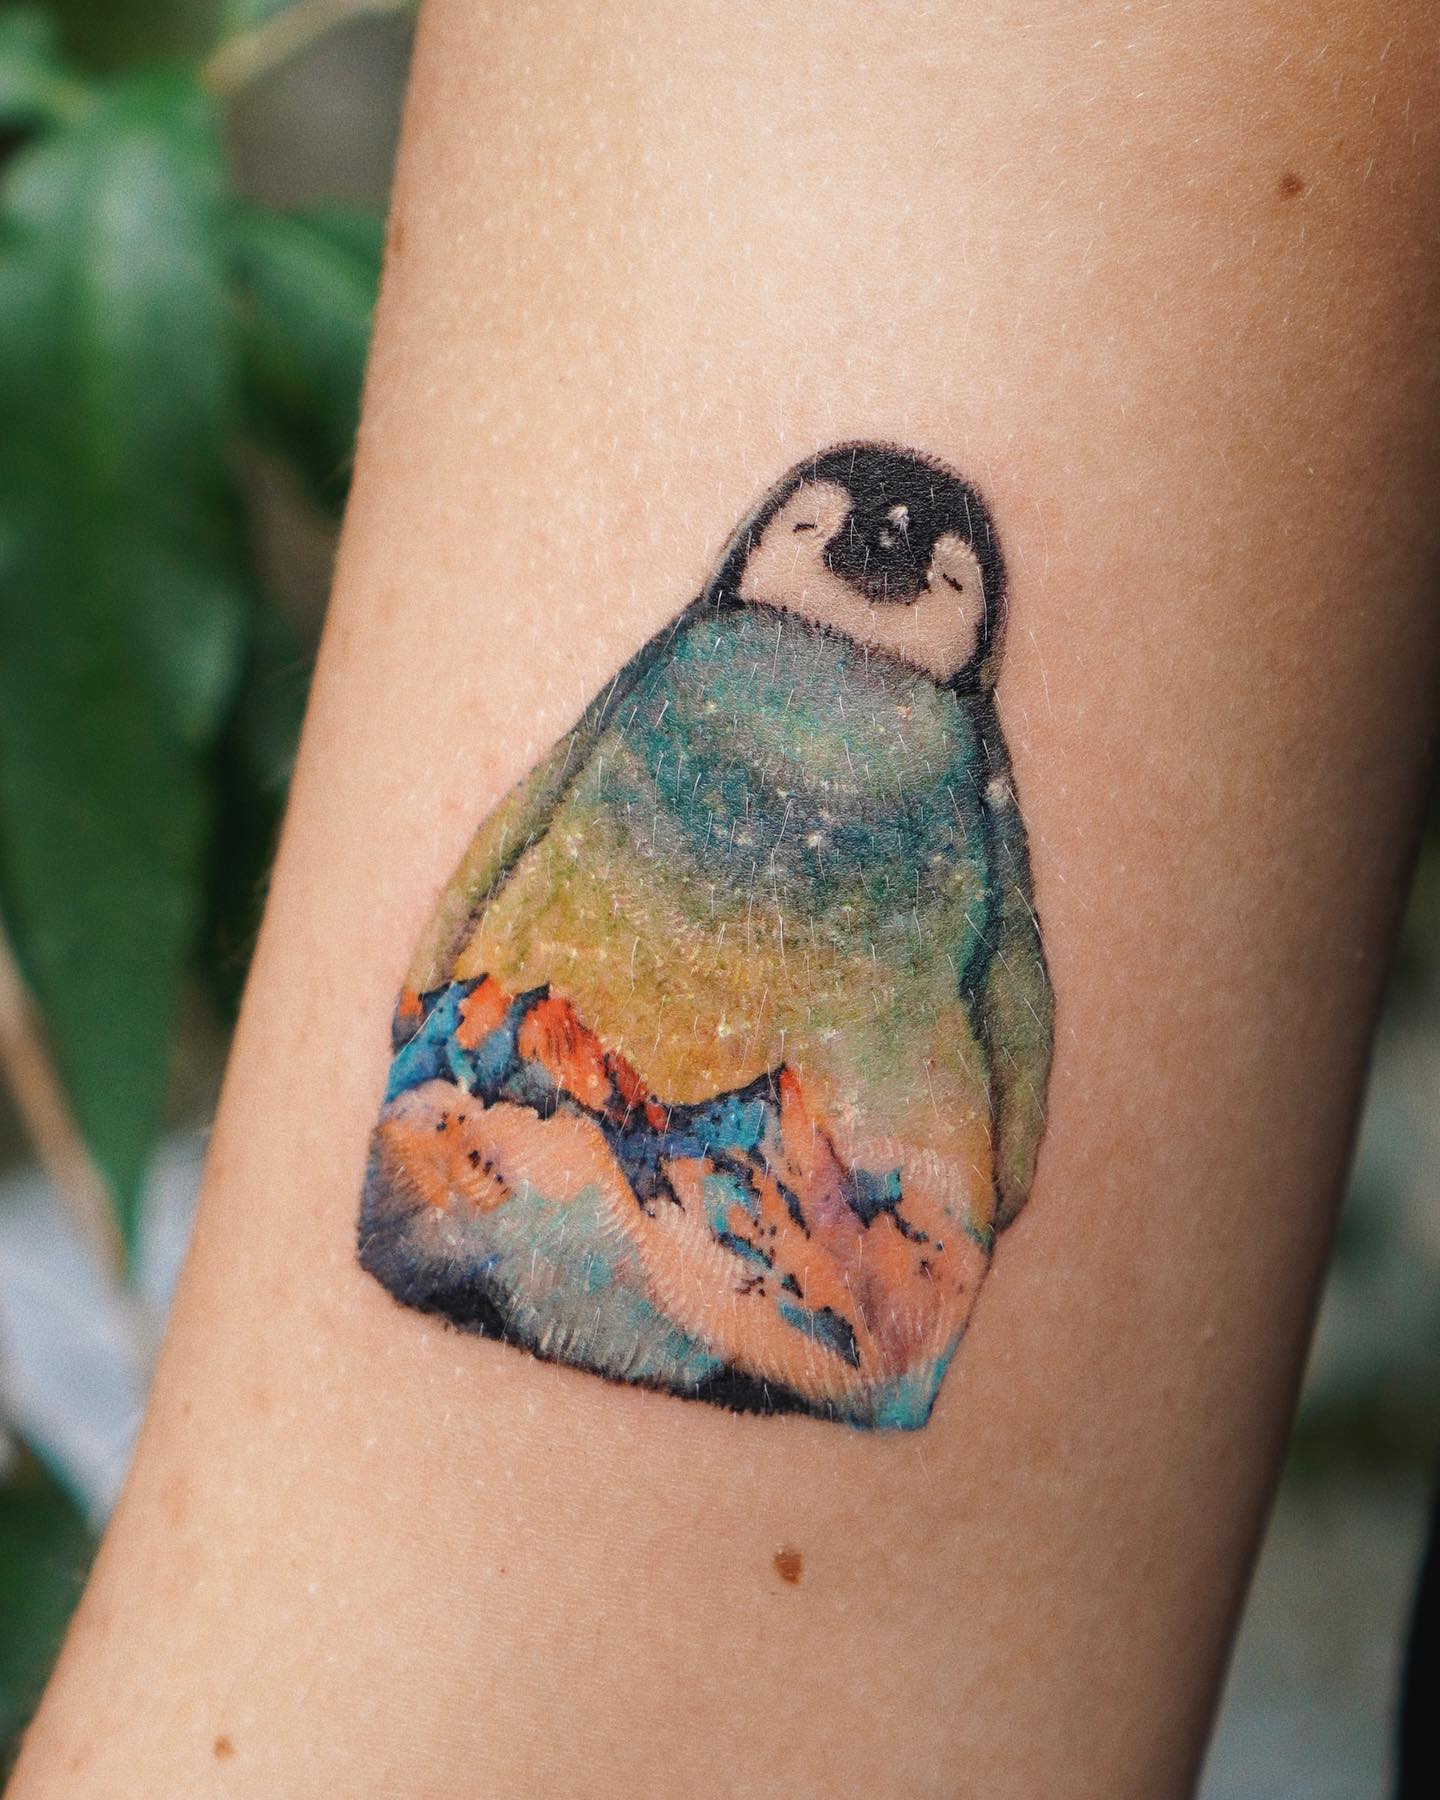 Overlayed in Antarctica, the penguin is in his happy place since we understand because of his smiley face. You should give this tattoo a try.